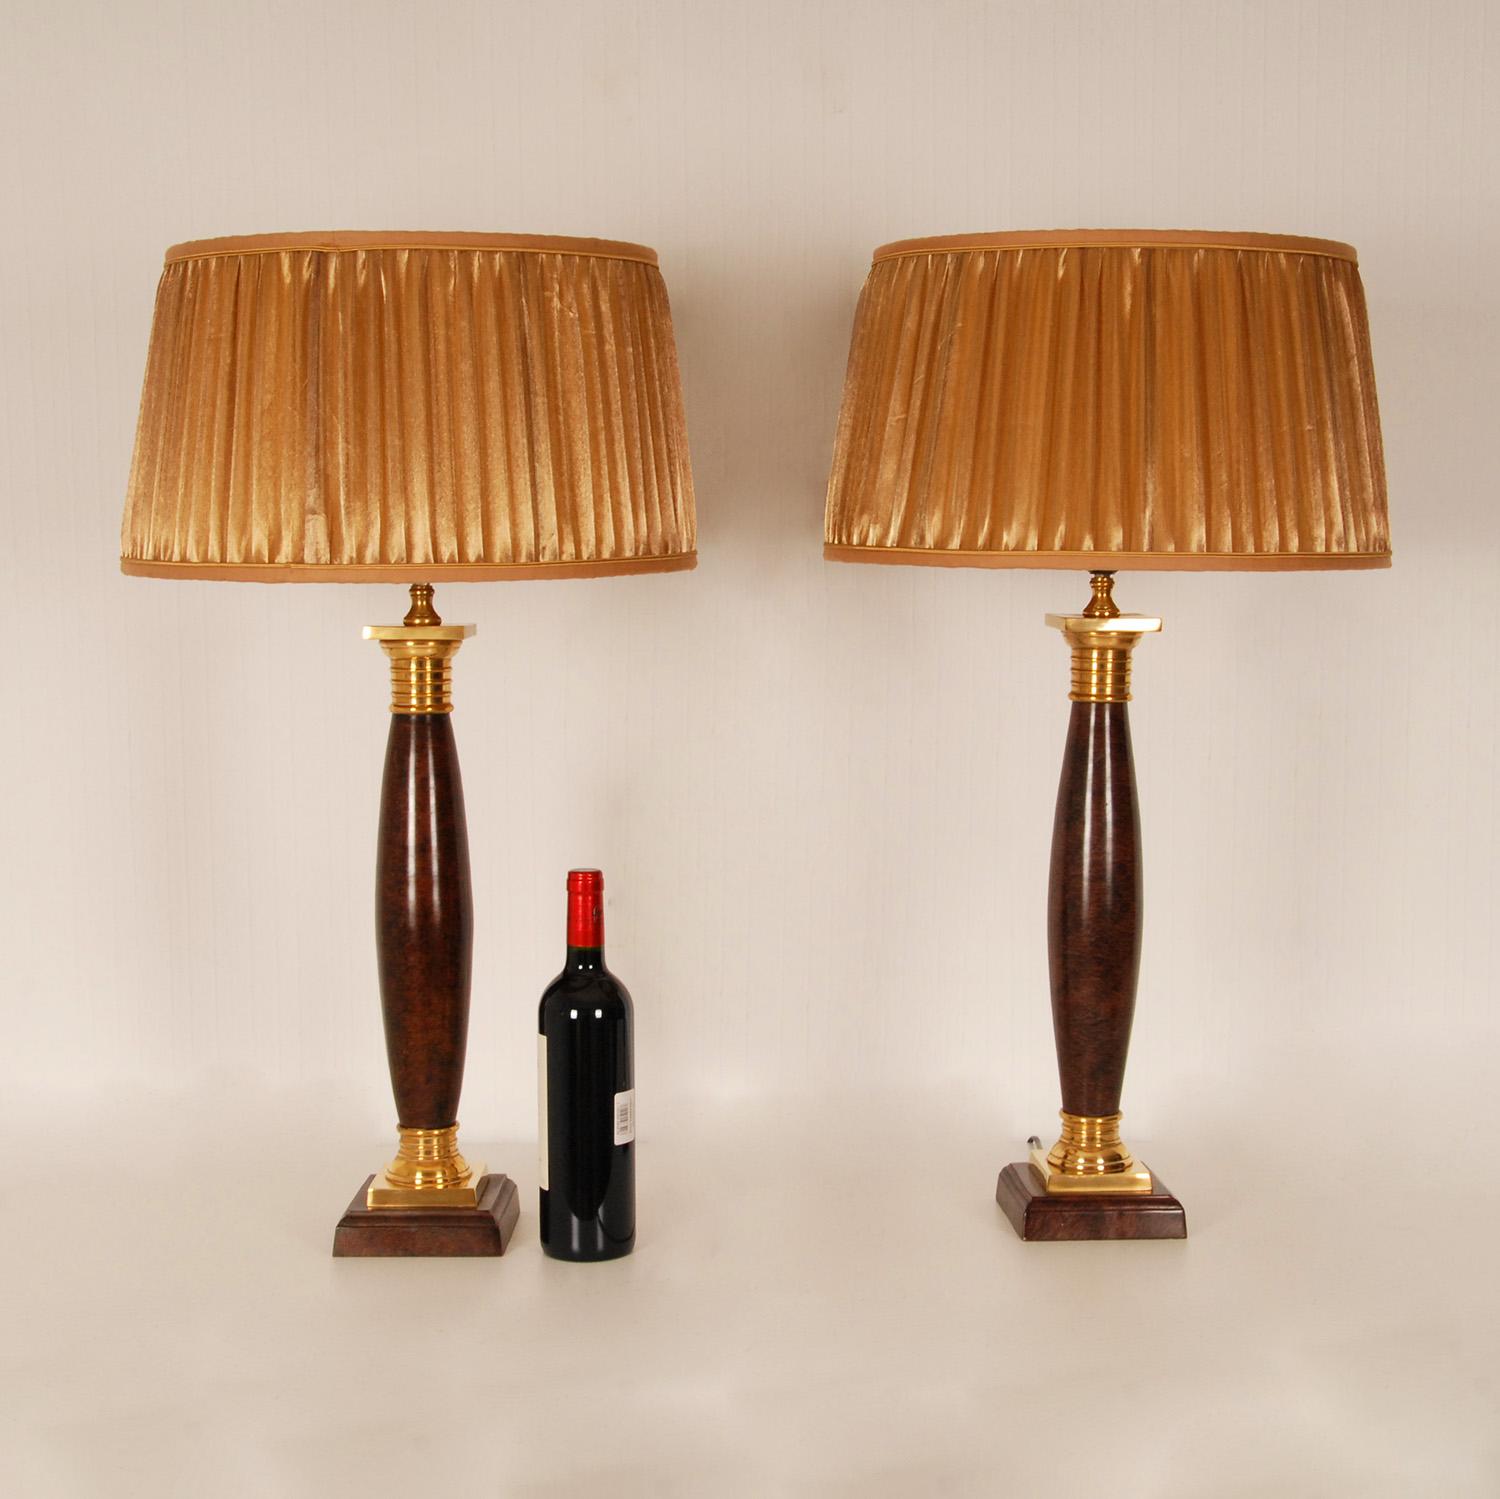 Empire Vintage Napoleonic Column Table Lamps French Rosewood Gold Gilded Bronze, a Pair For Sale